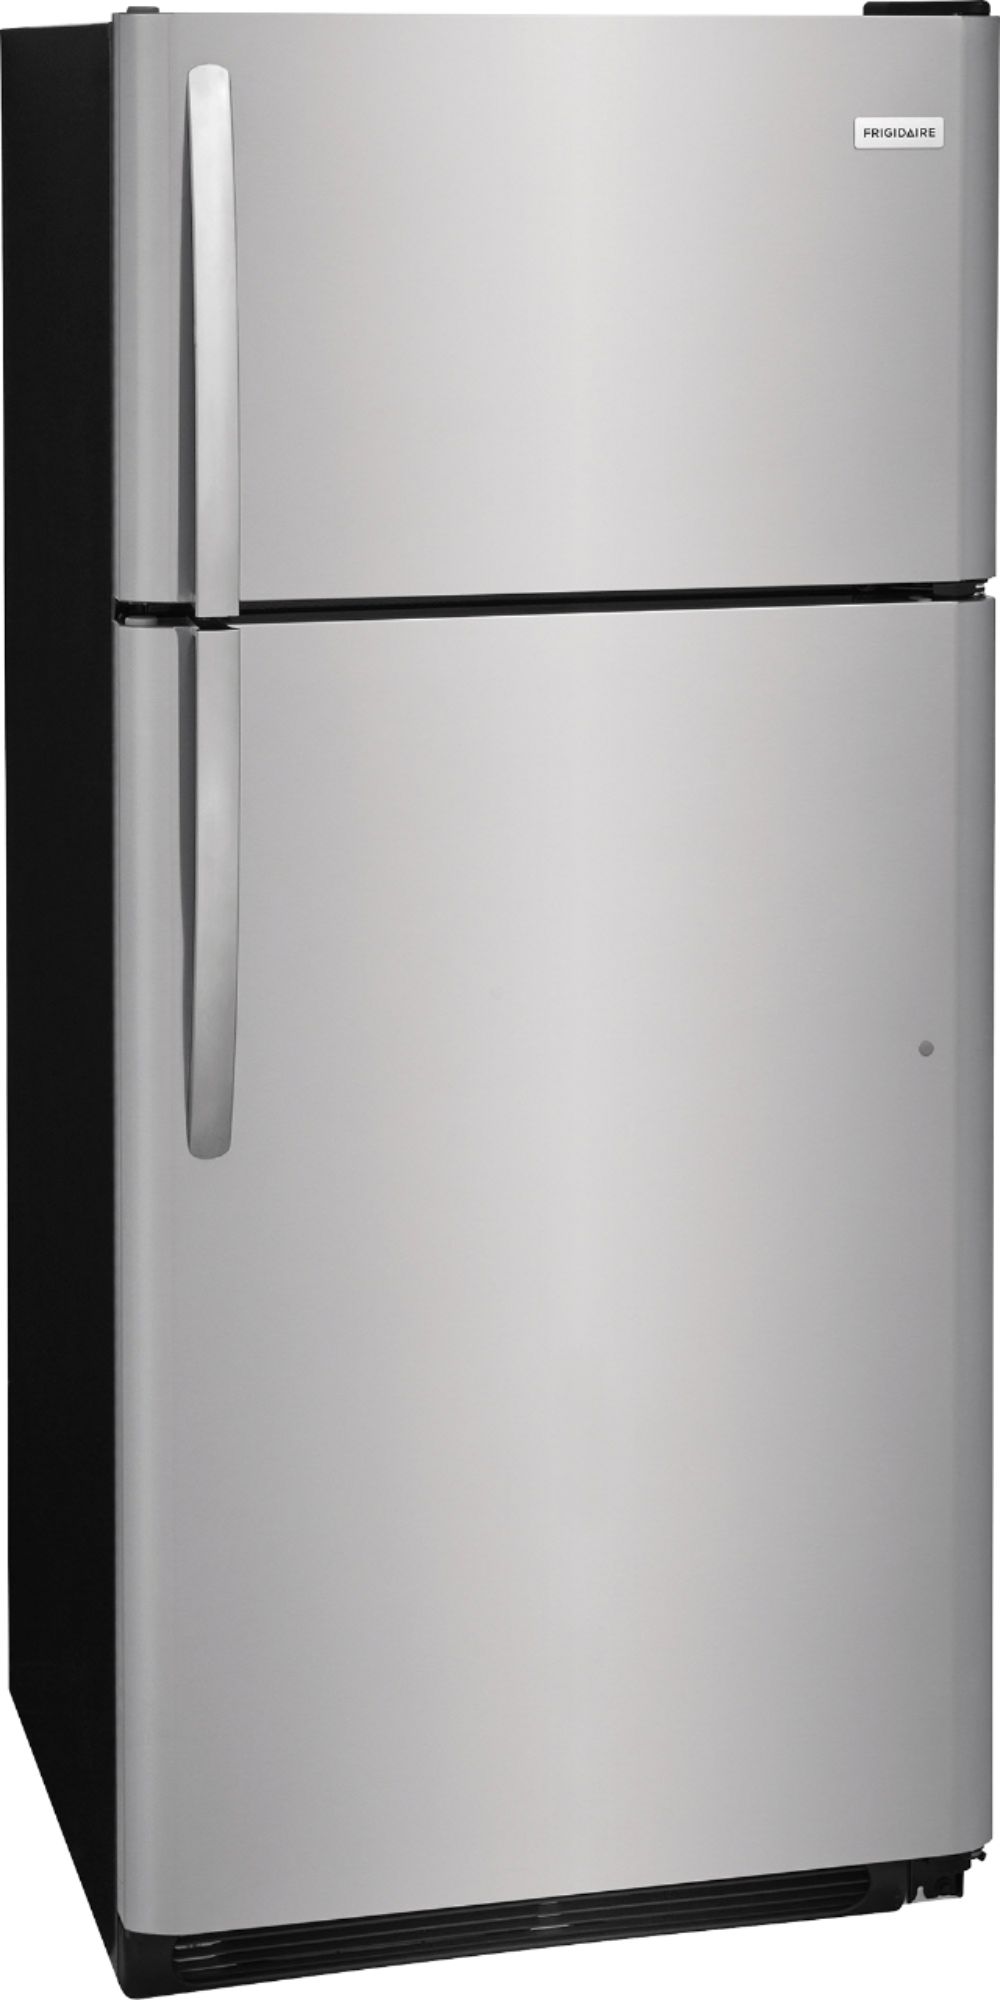 Angle View: Frigidaire - 18 Cu. Ft. Top-Freezer Refrigerator - Stainless steel